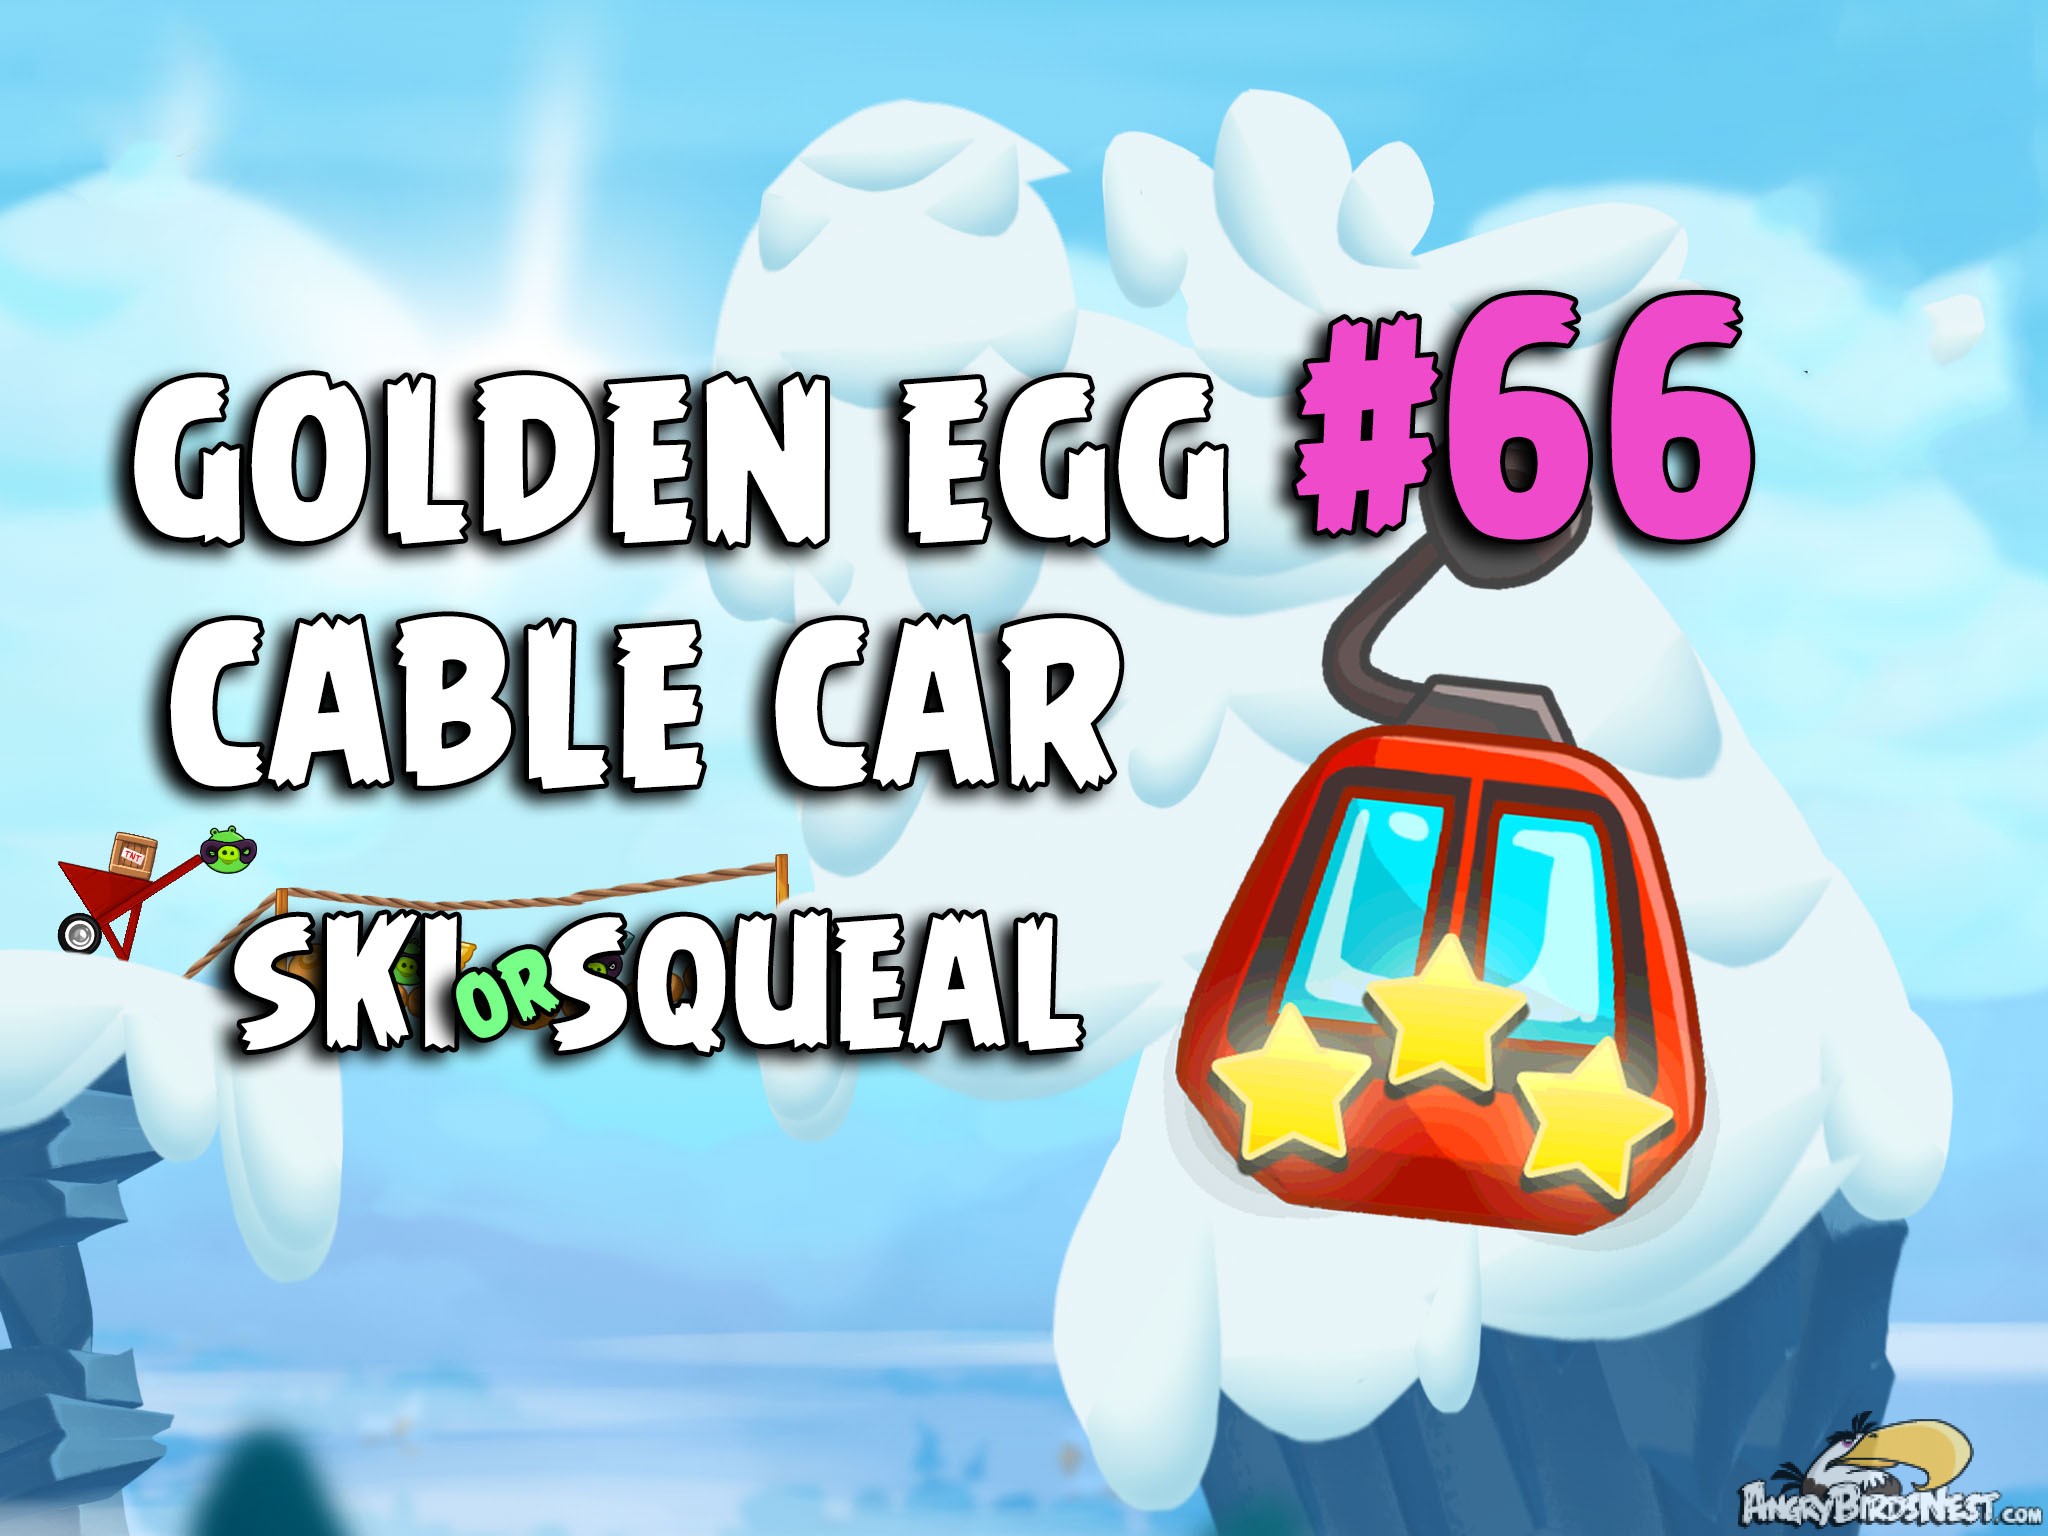 Angry Birds Seasons Ski or Squeal Golden Egg 66 Cable Car